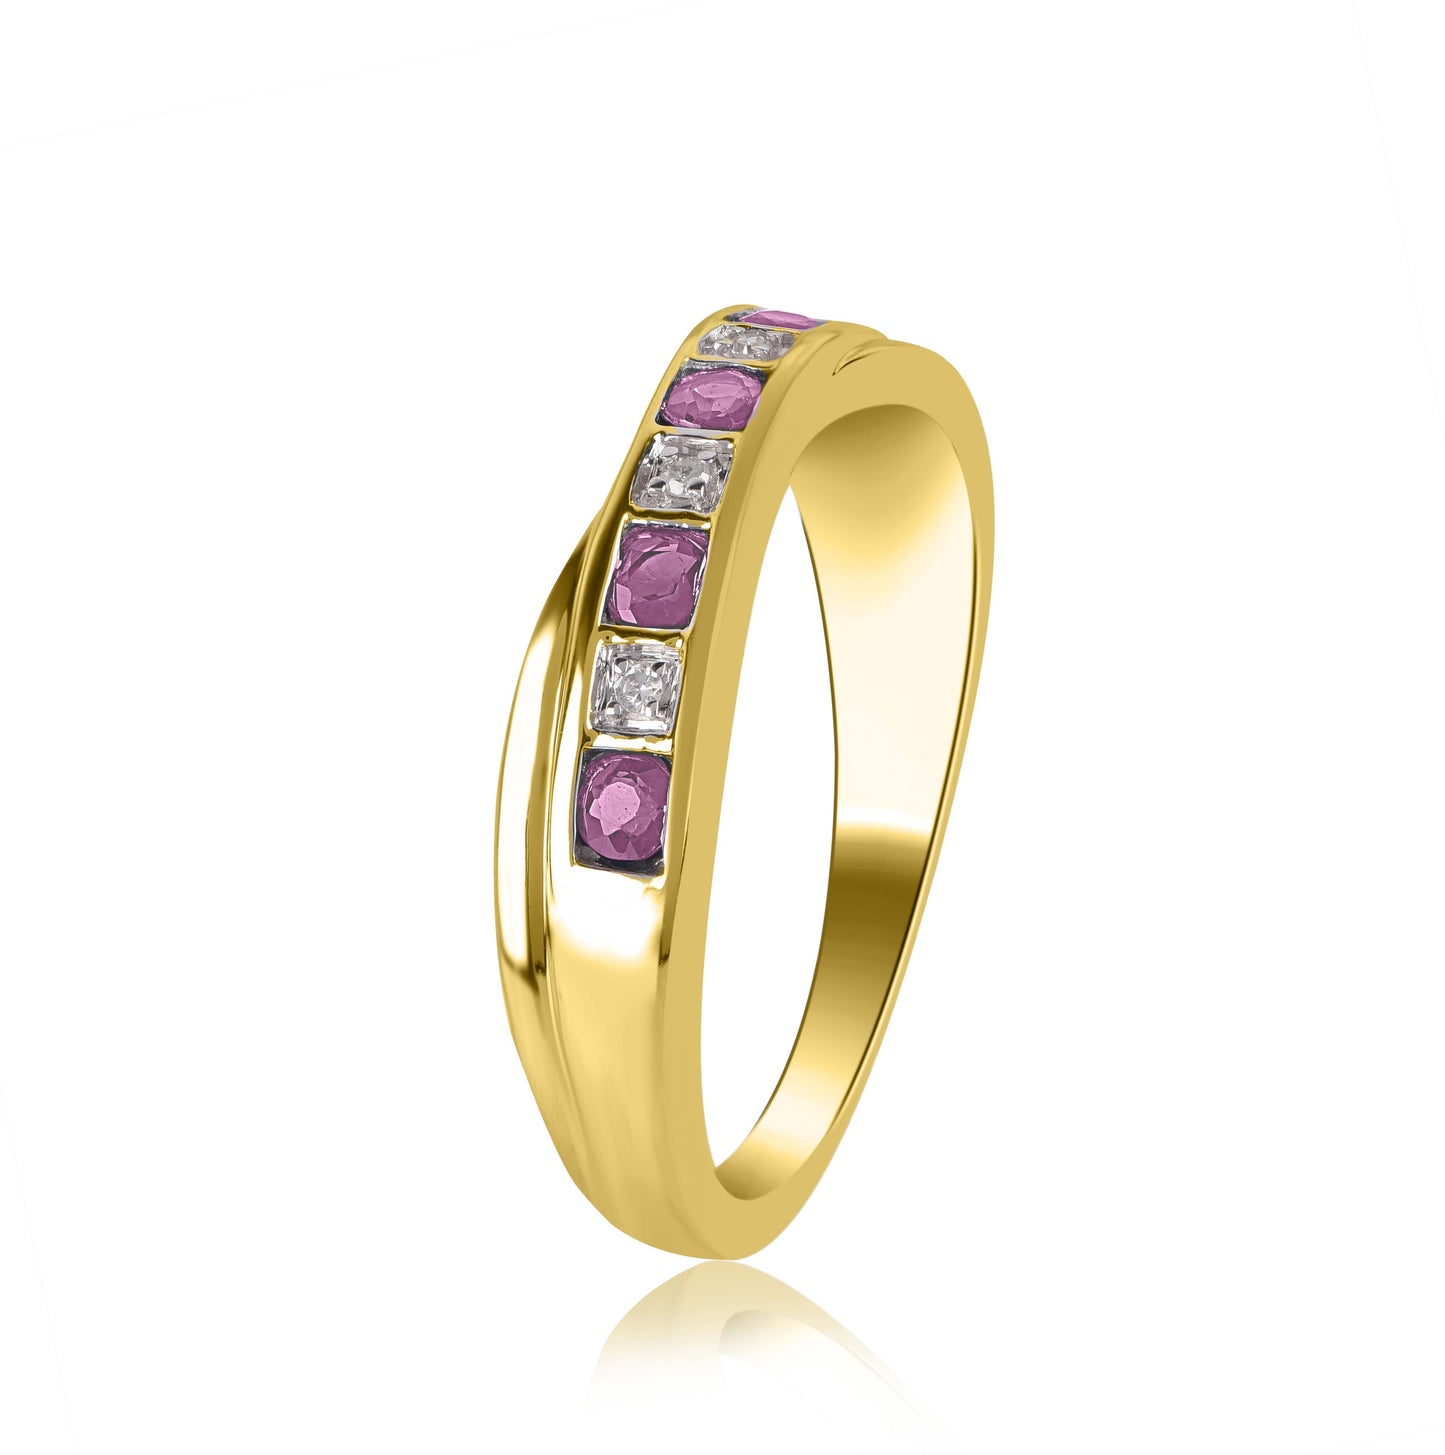 Diamond and Pink Sapphire Criss-cross Ring in 10K Gold